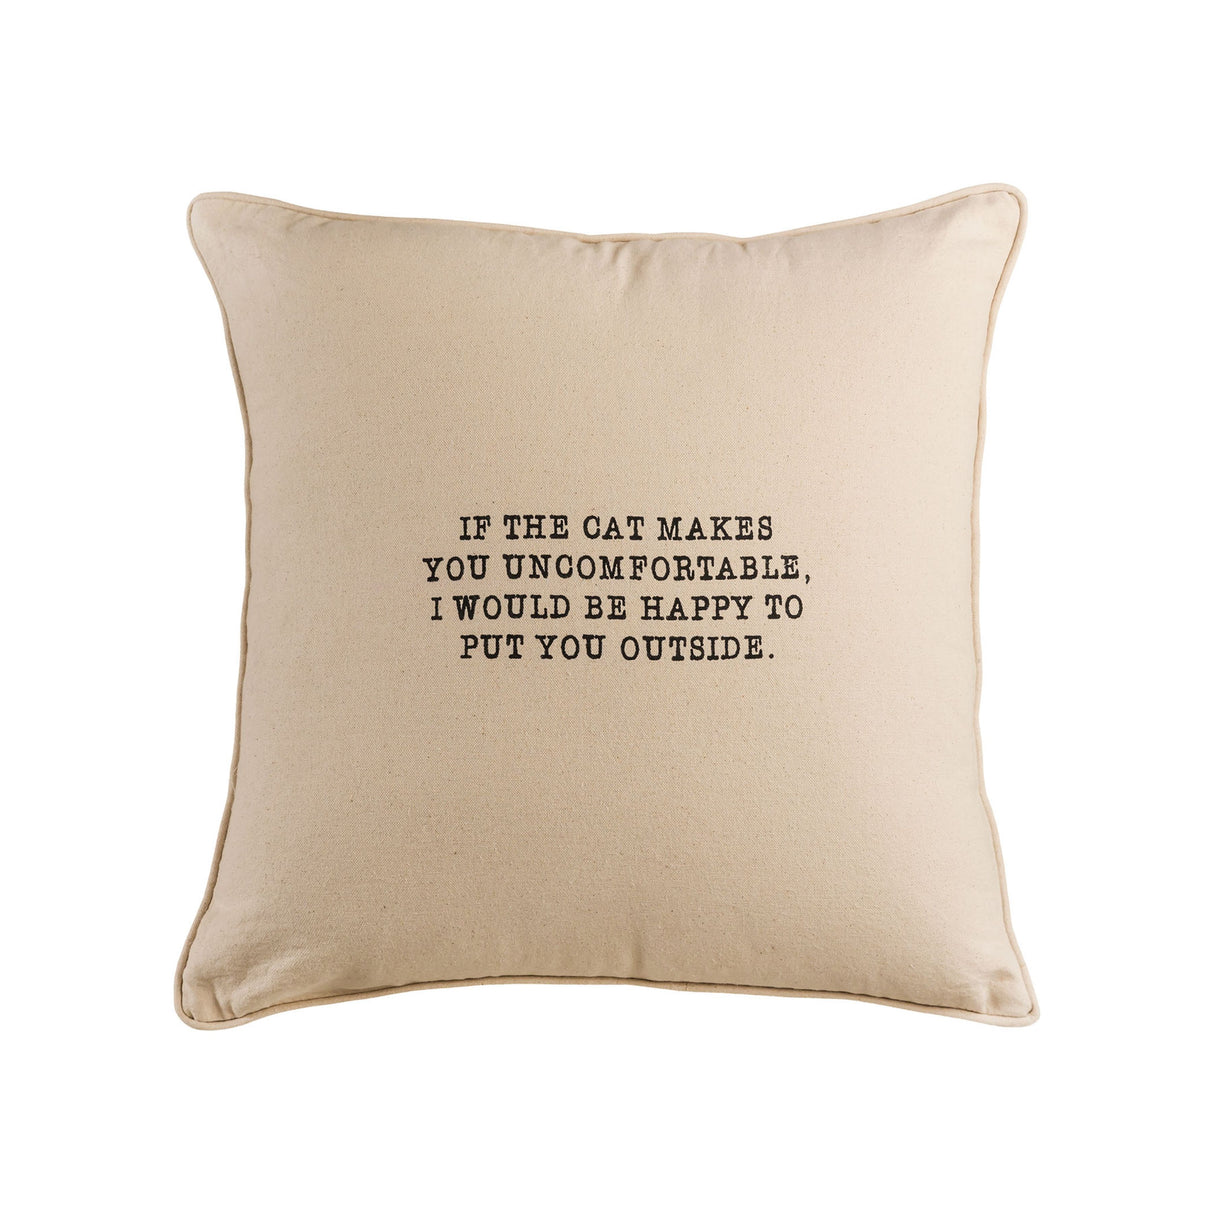 Elk PLW020 If the Cat Makes You Uncomfortable 20x20 Pillow in Bleached White with Gold Print